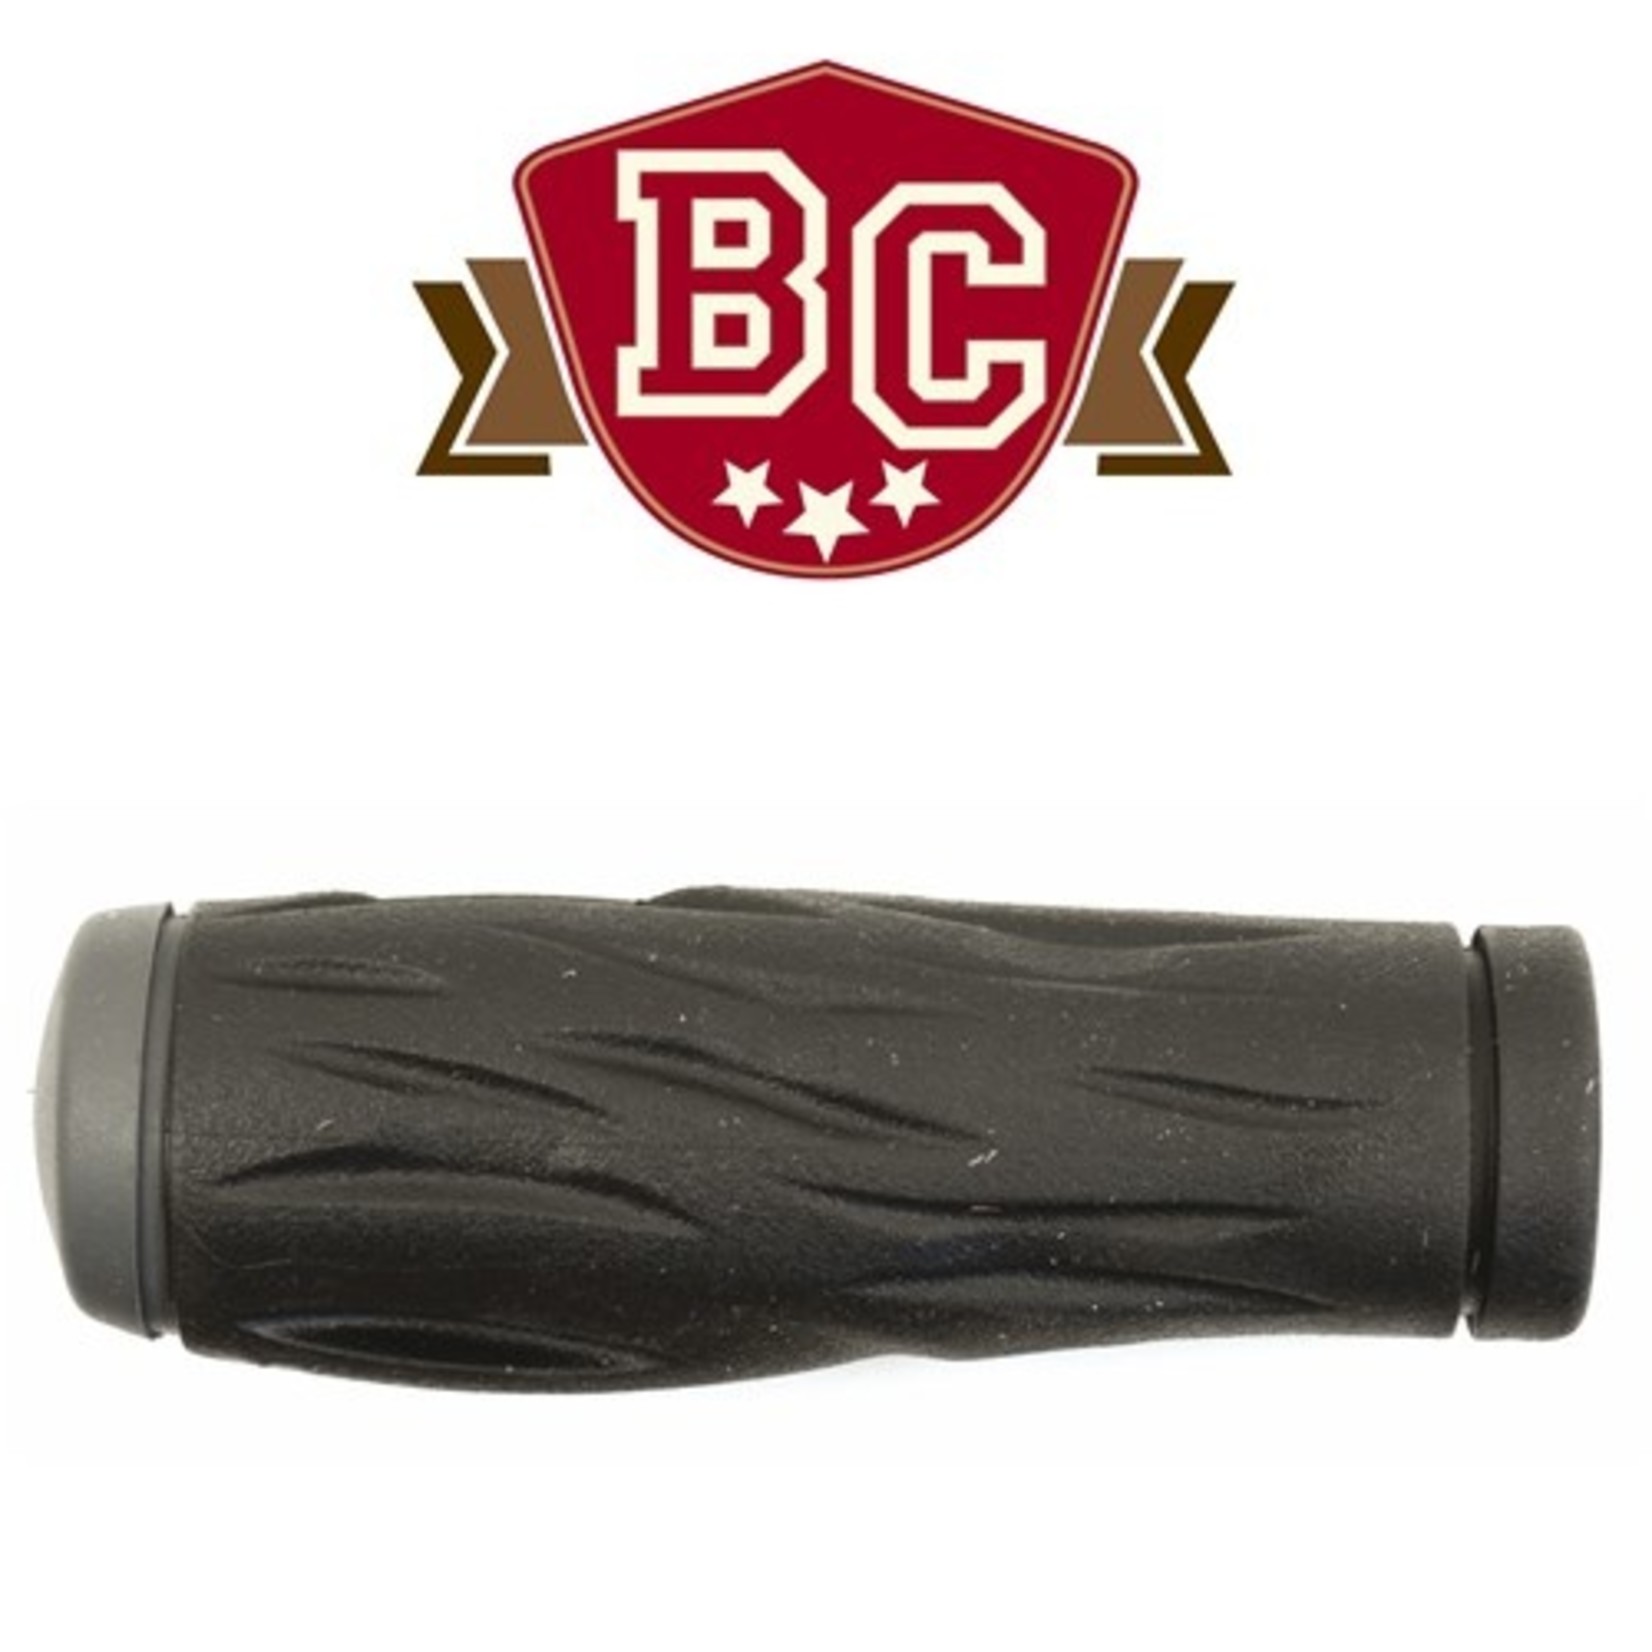 Bikecorp BC Bike/Cycling Handlebar Comfort Grip - Rubber With Gel Inserts - Black